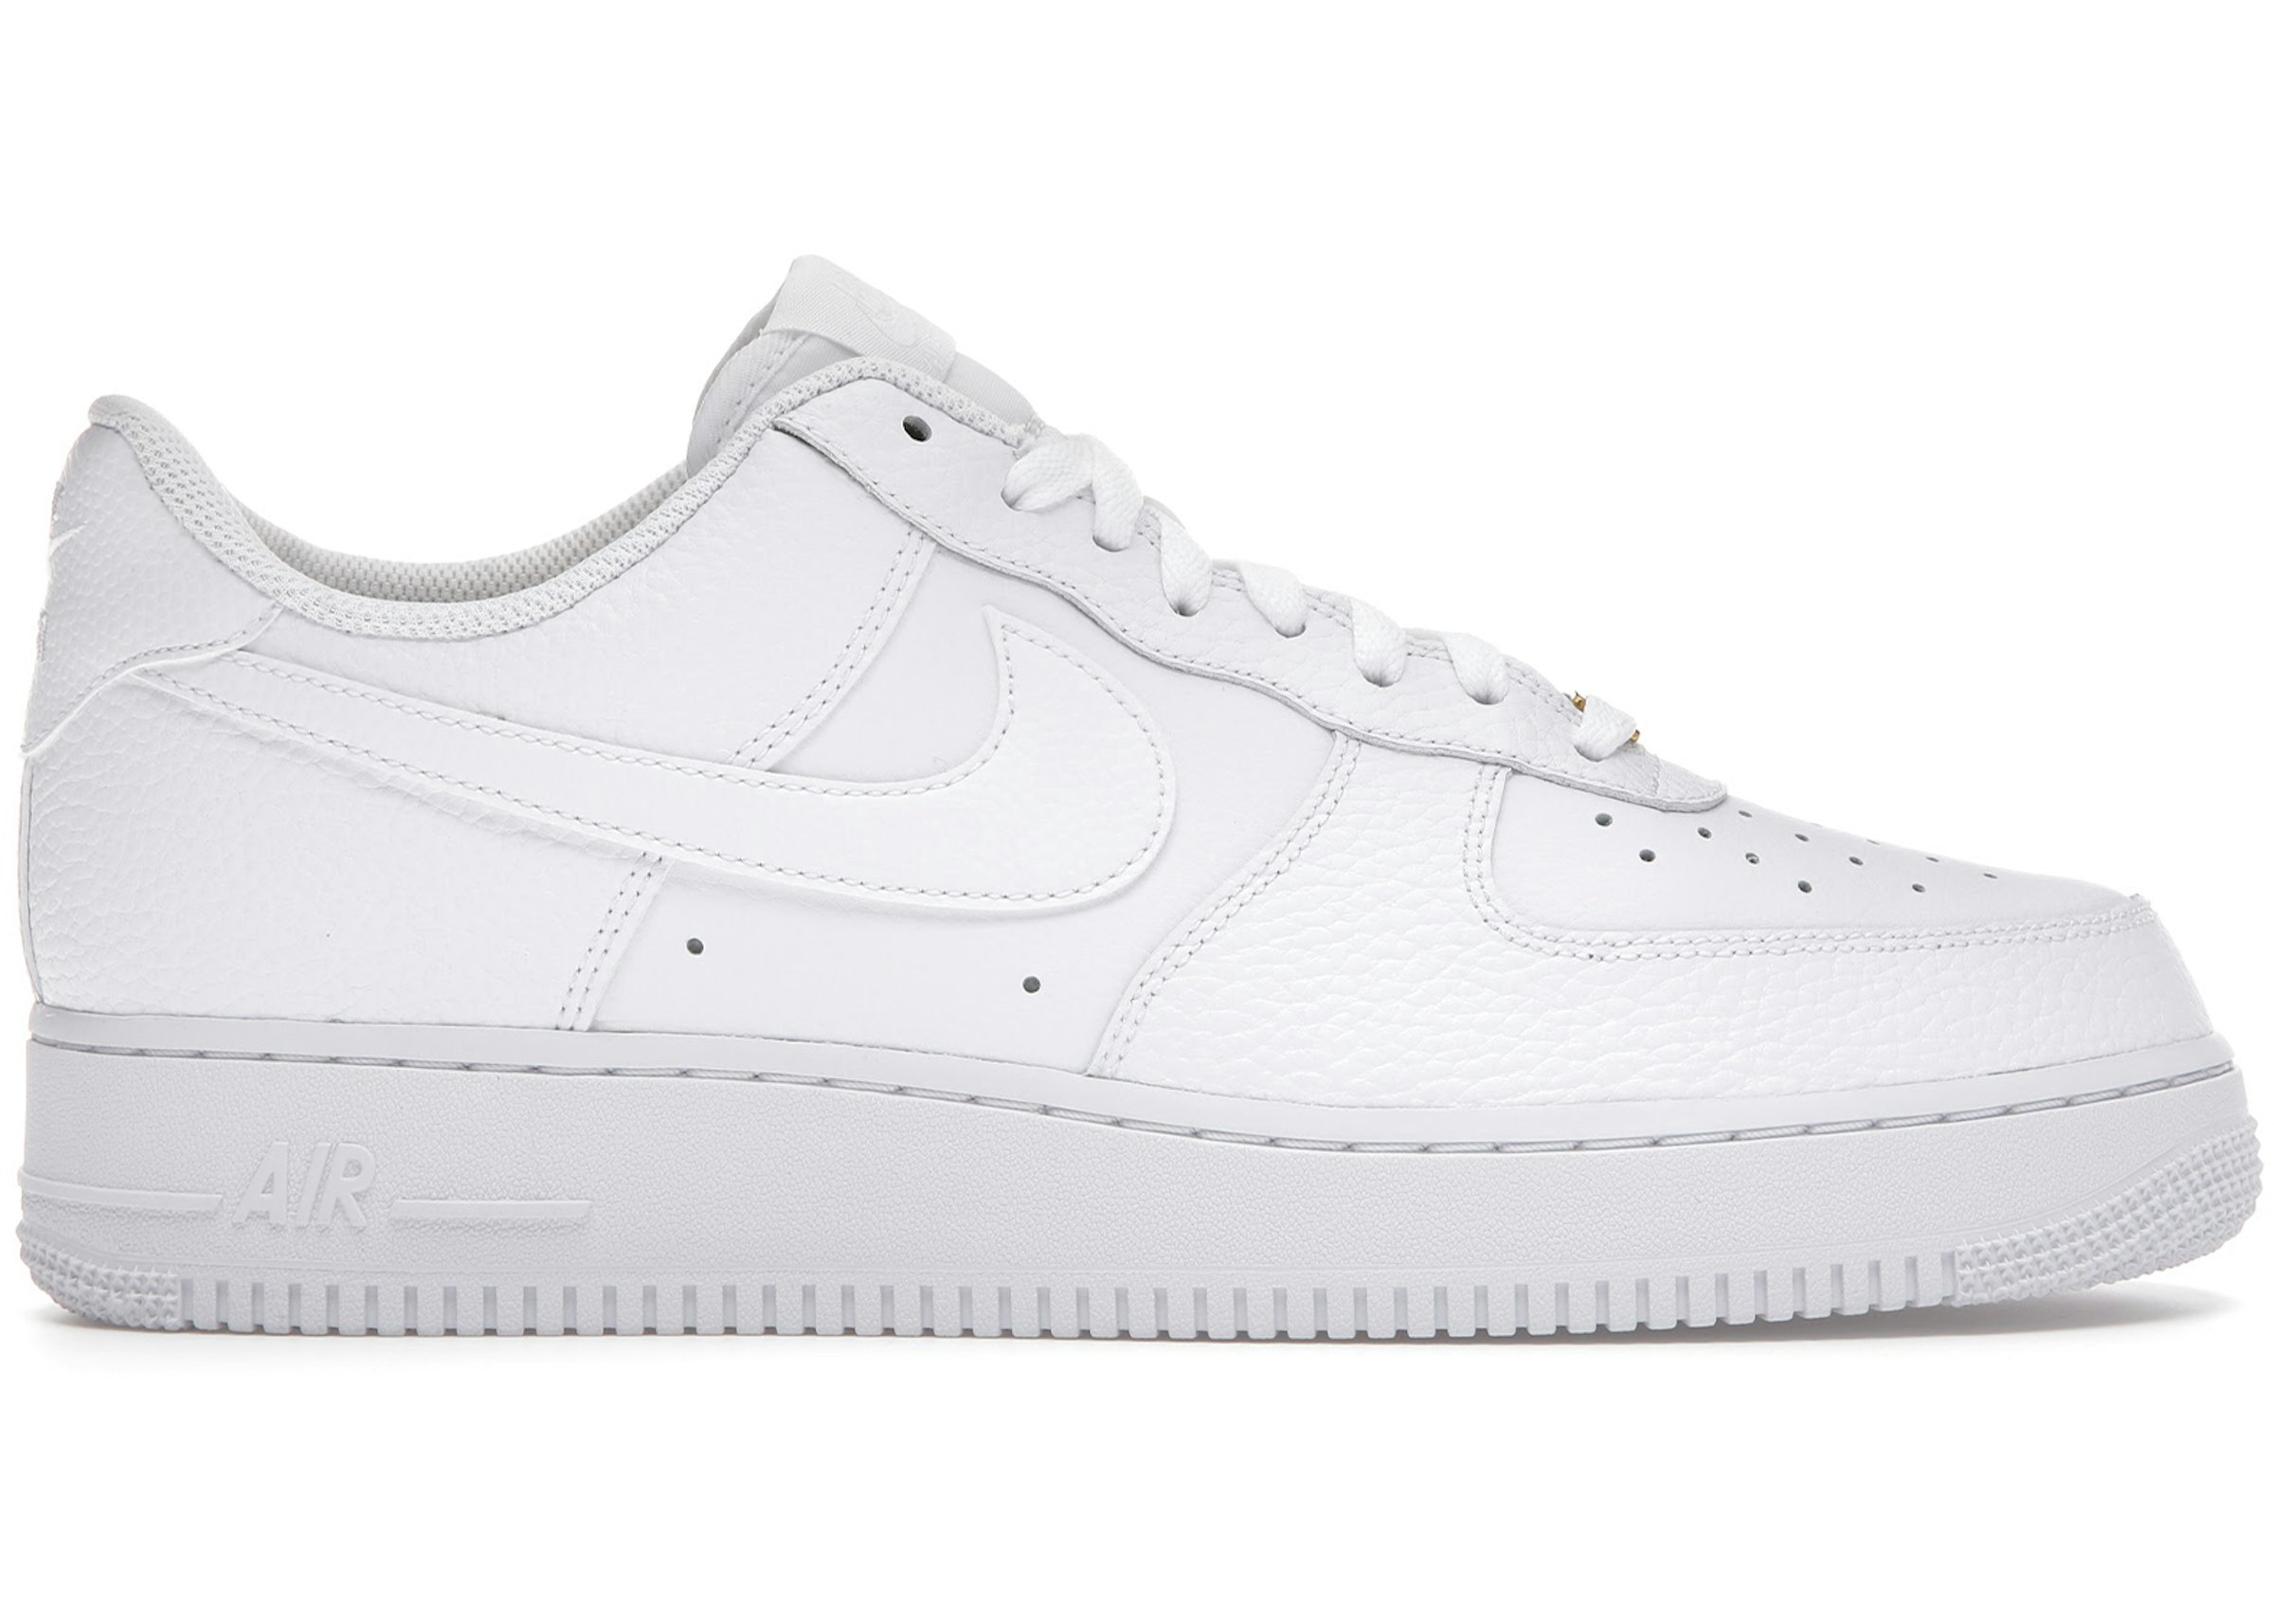 Europa níquel padre Nike Air Force 1 Low Triple White Tumbled Leather Men's - CZ0326-101 - US